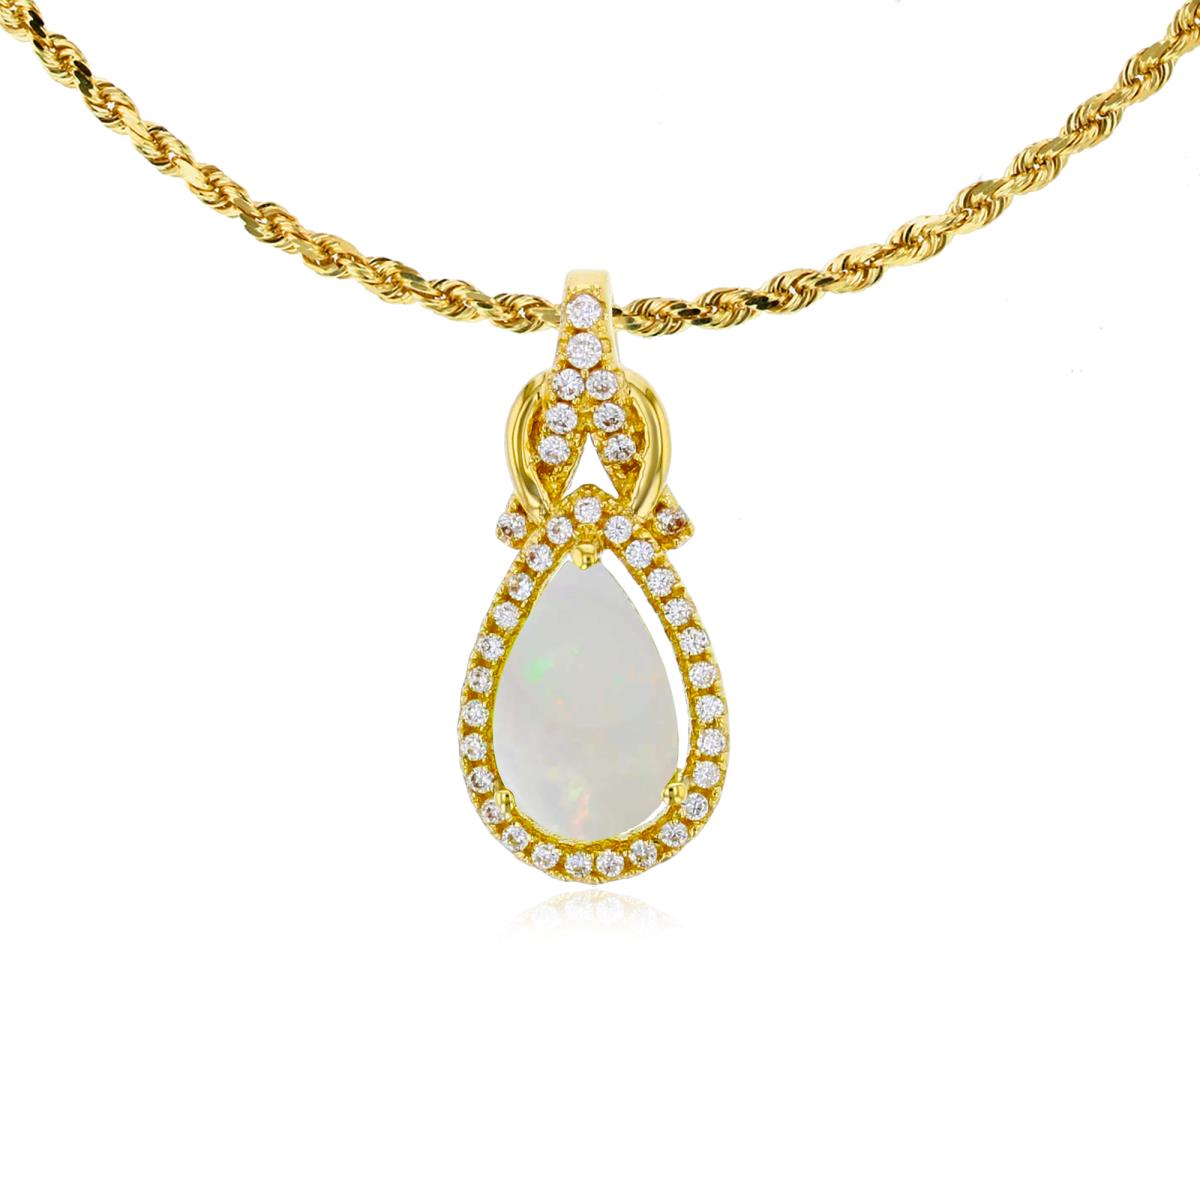 14K Yellow Gold 8x5mm Pear Cut Opal & 0.11 CTTW Rnd Diamond Knot 18" Rope Chain Necklace